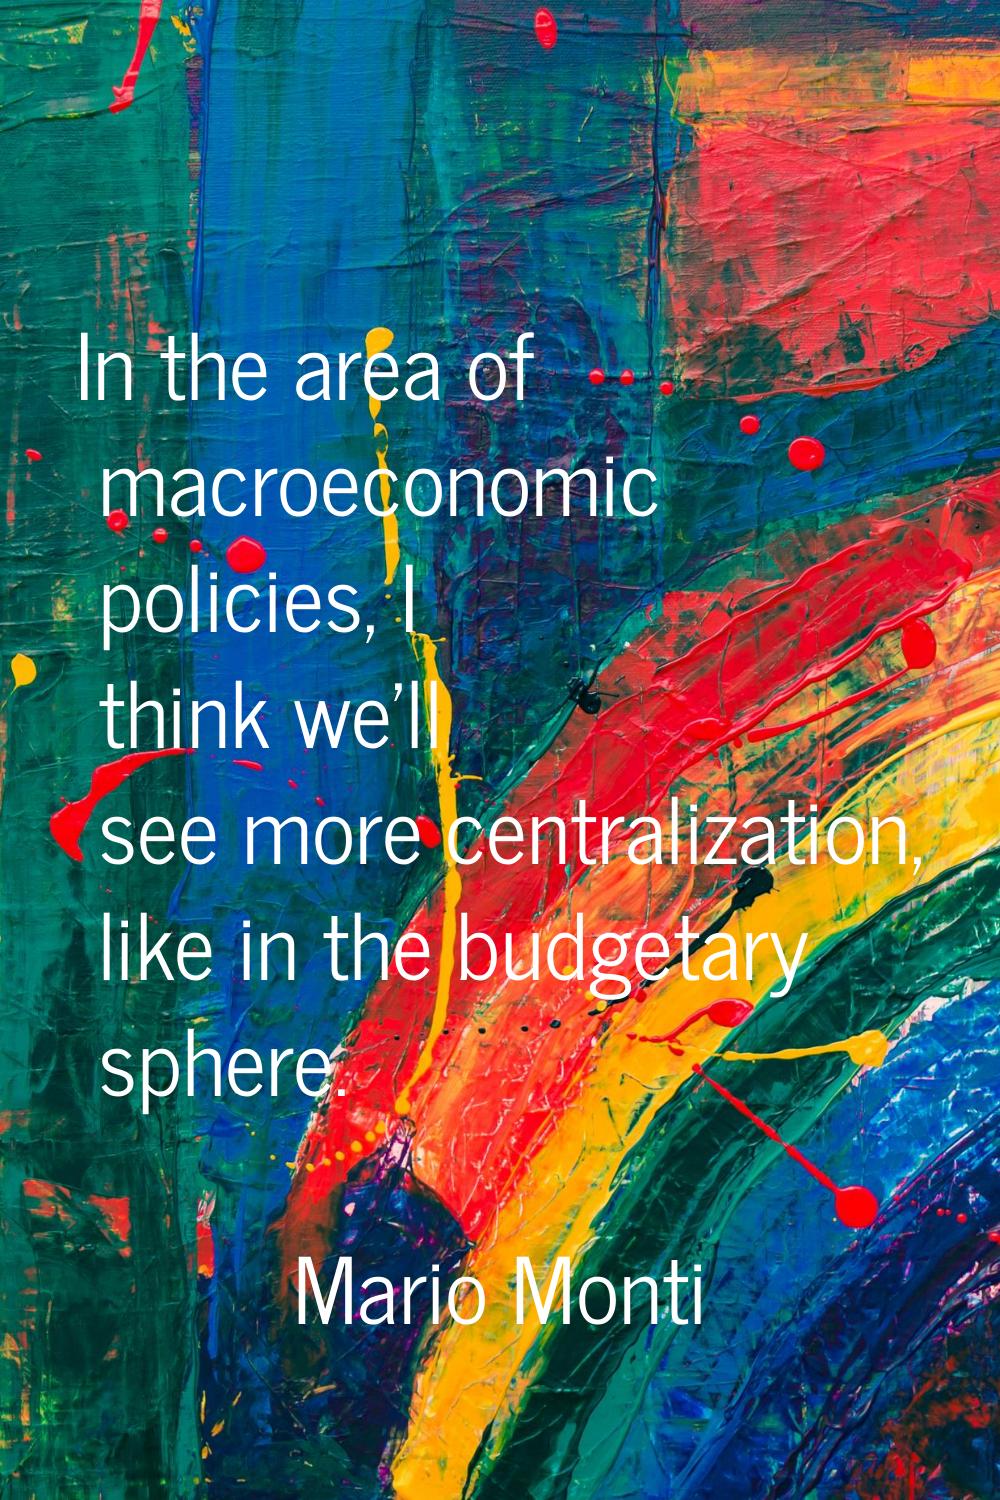 In the area of macroeconomic policies, I think we'll see more centralization, like in the budgetary